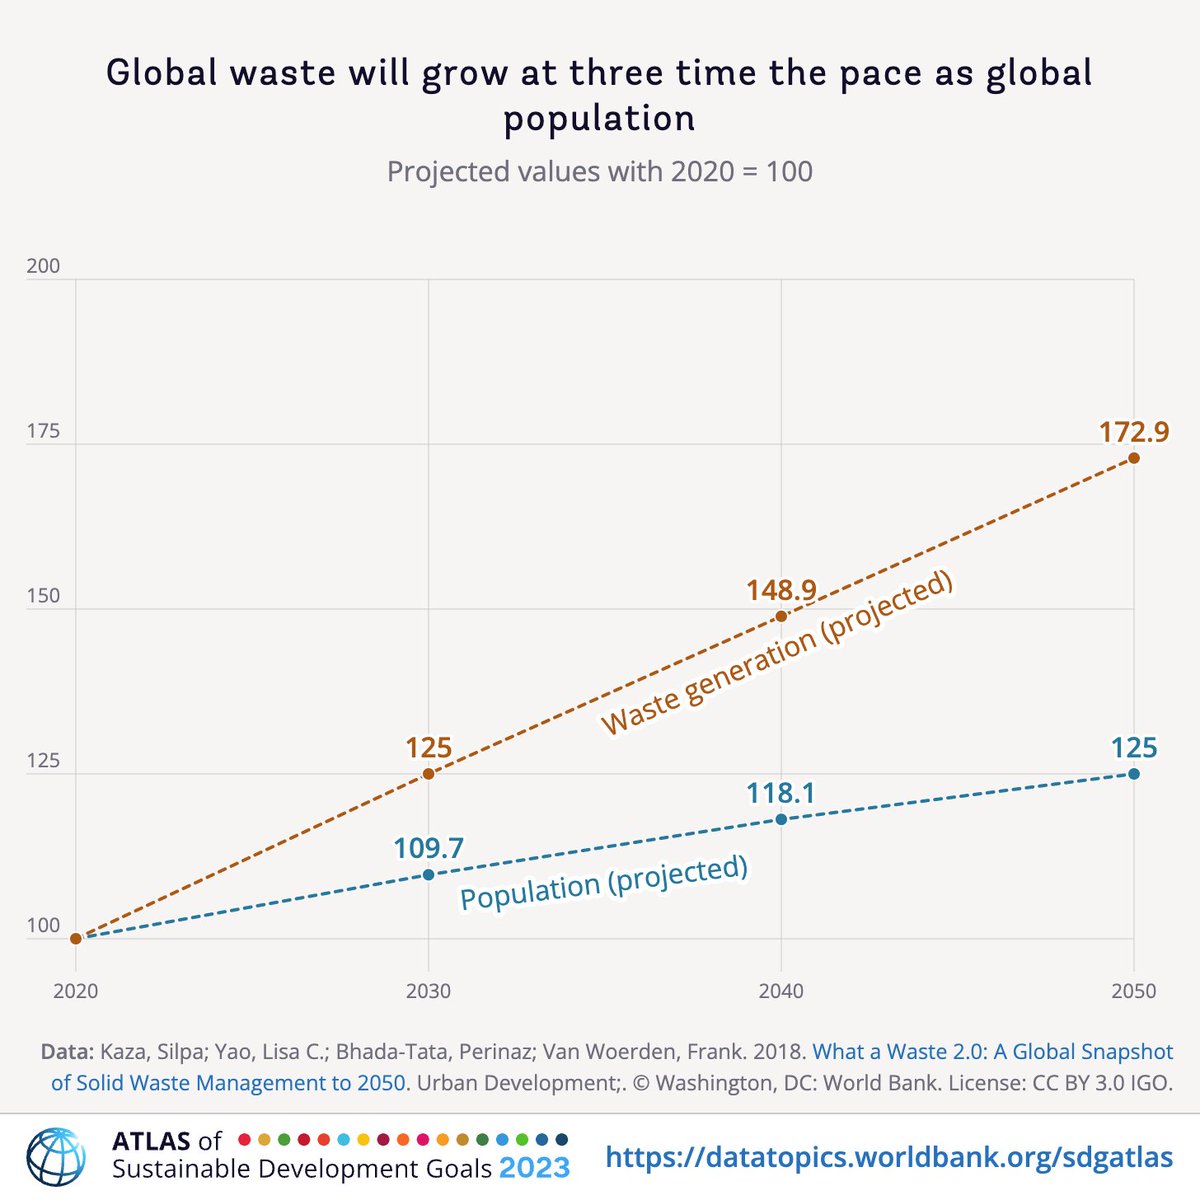 #SDG11 Sustainable Cities & Communities | The scale of global waste is alarming. Did you know that the waste produced per person is 6 times heavier than the weight of an average person today? With waste projected to outpace population growth, urgent action is vital. 

#SDGAtlas